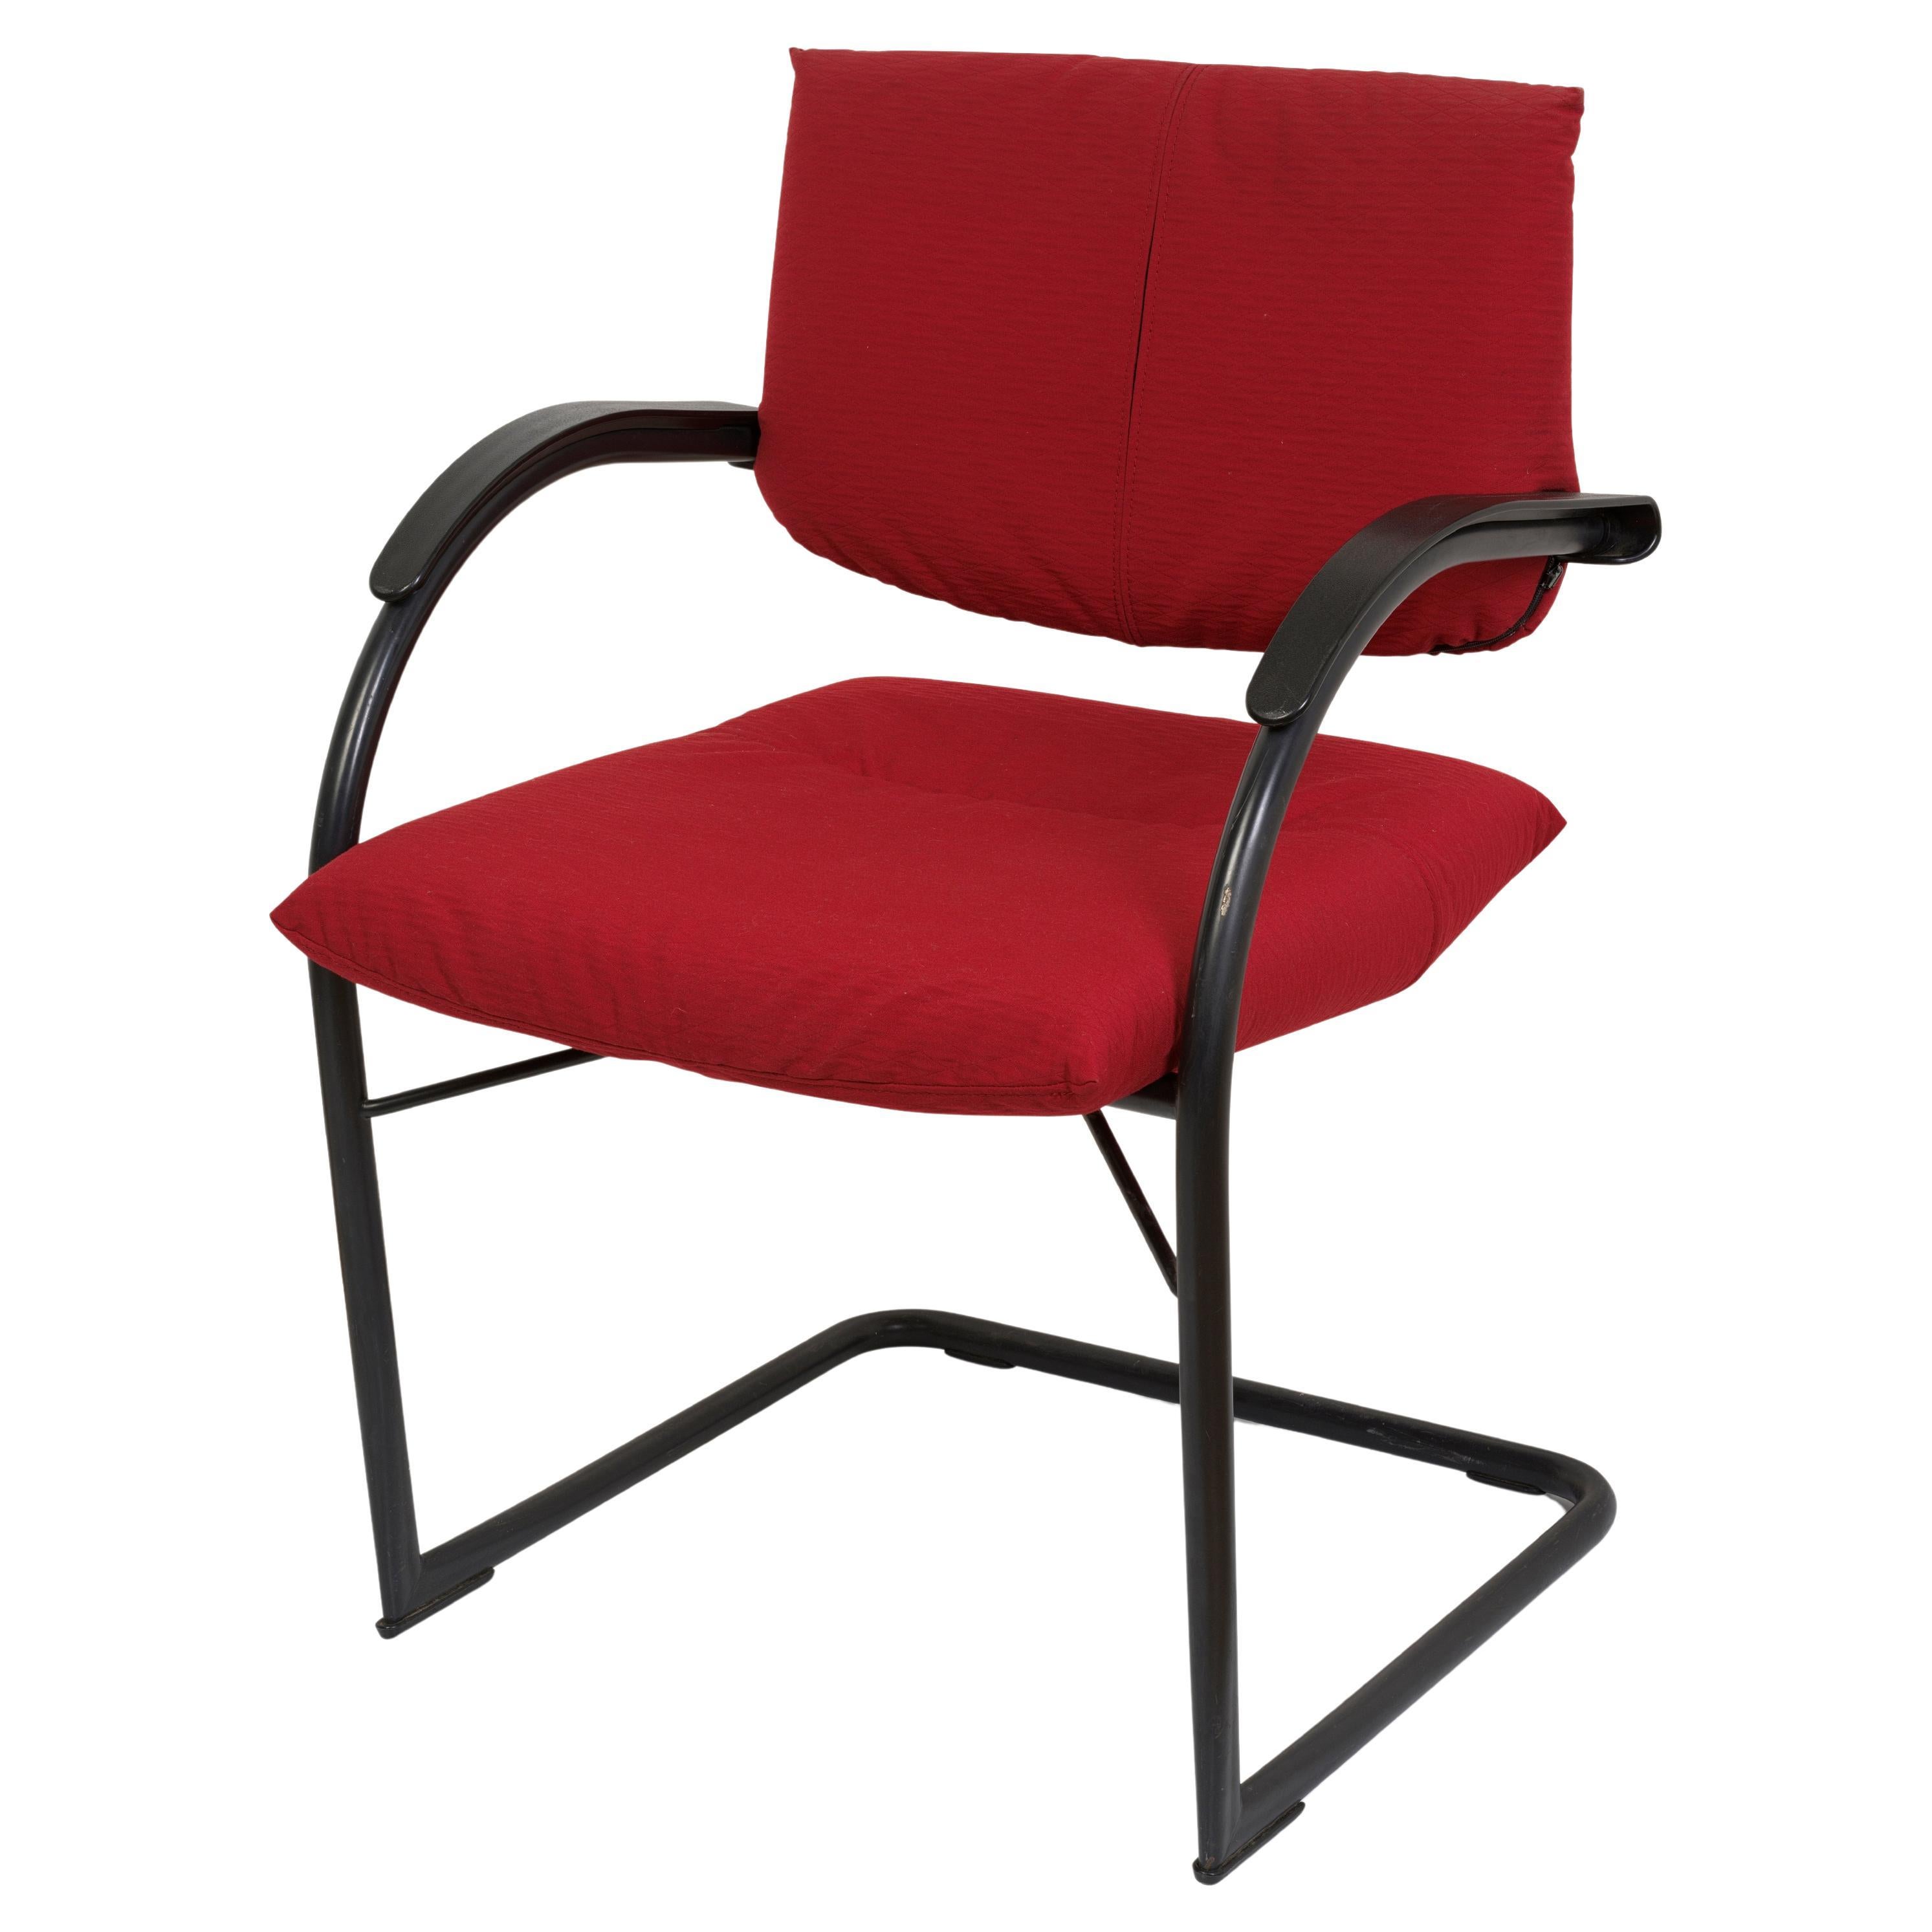 Mario Bellini "Forma" Cantilever Armchair for Vitra, Italy 1990s For Sale